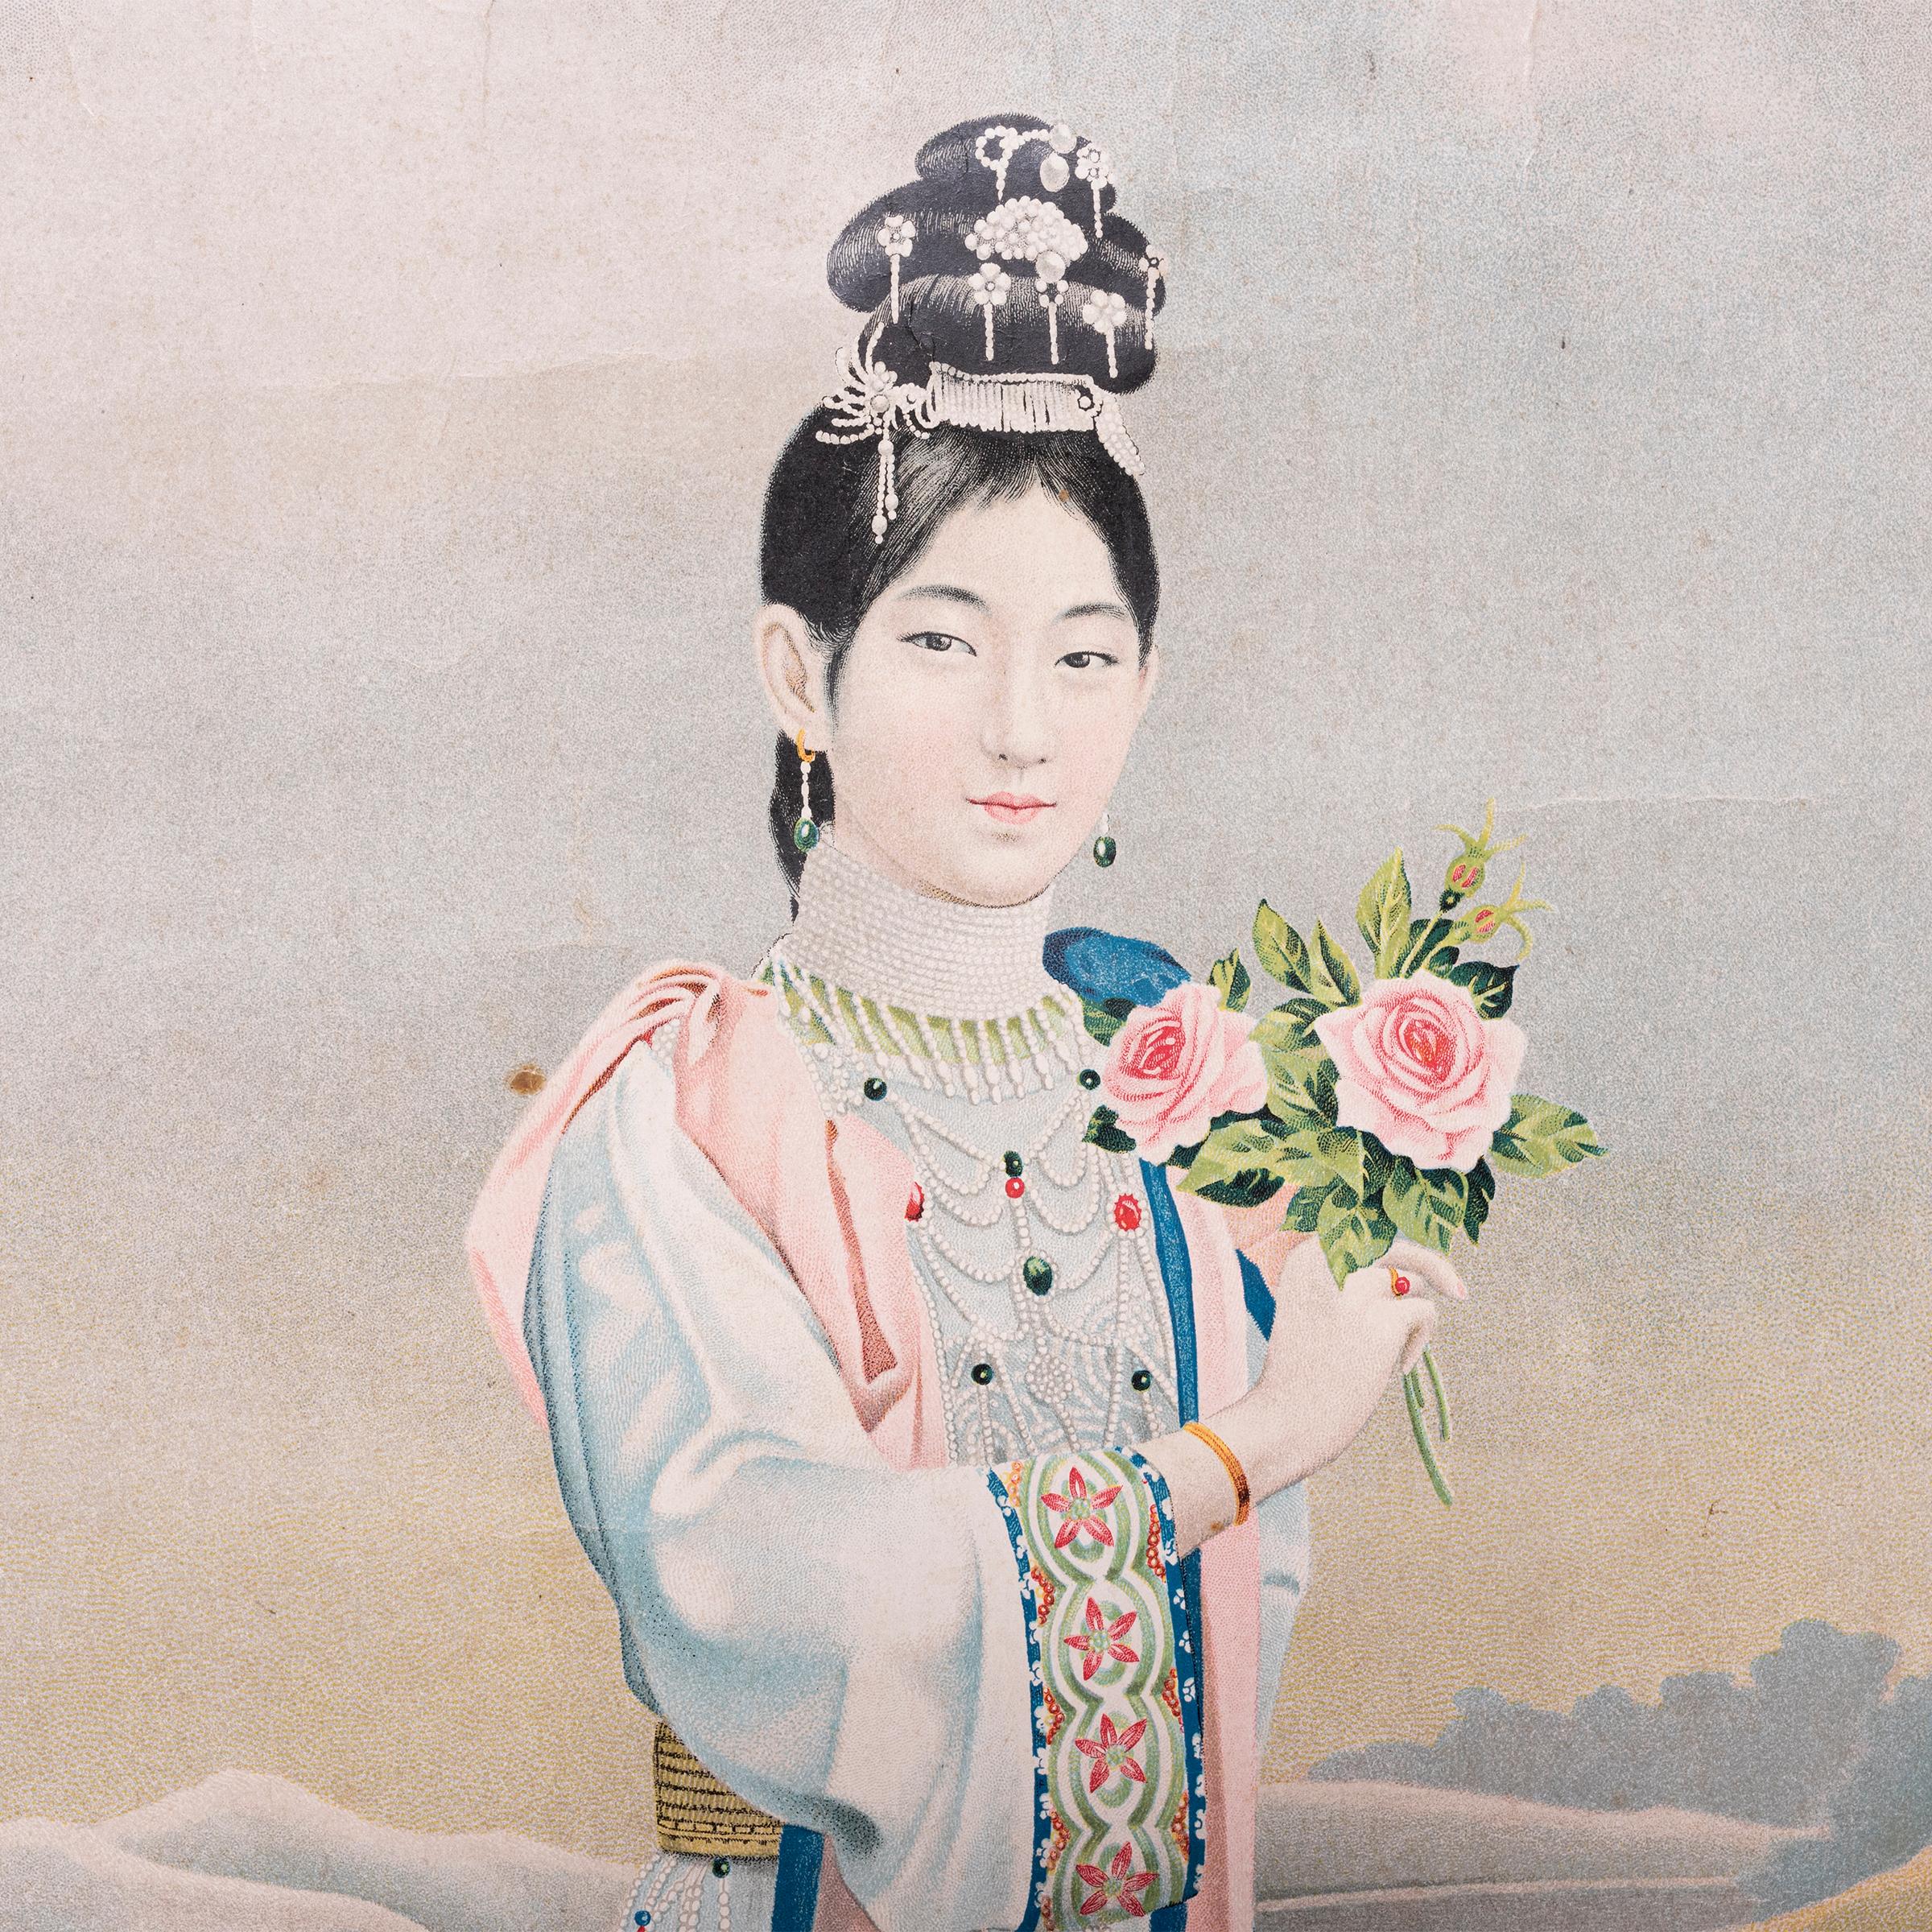 This vintage poster from the 1930s melds the meticulous detail of traditional Chinese painting with the Craft of color lithography. The serene landscape print depicts a young woman dressed in an ornate gown and draped with pearls and gemstones.